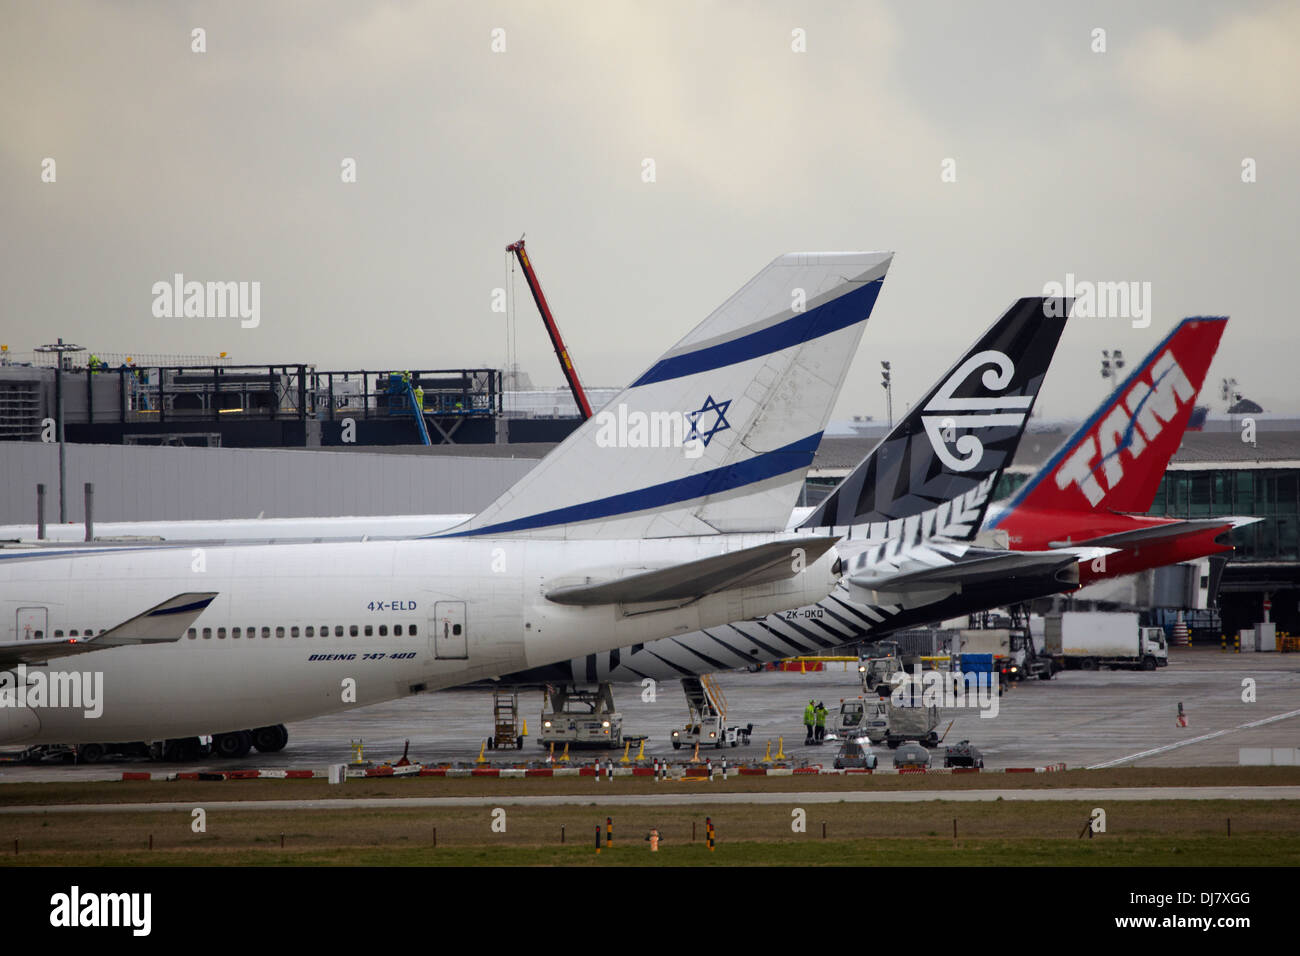 El Al Israel Airlines, Air New Zealand and TAM aircraft tails at London Heathrow Airport Stock Photo